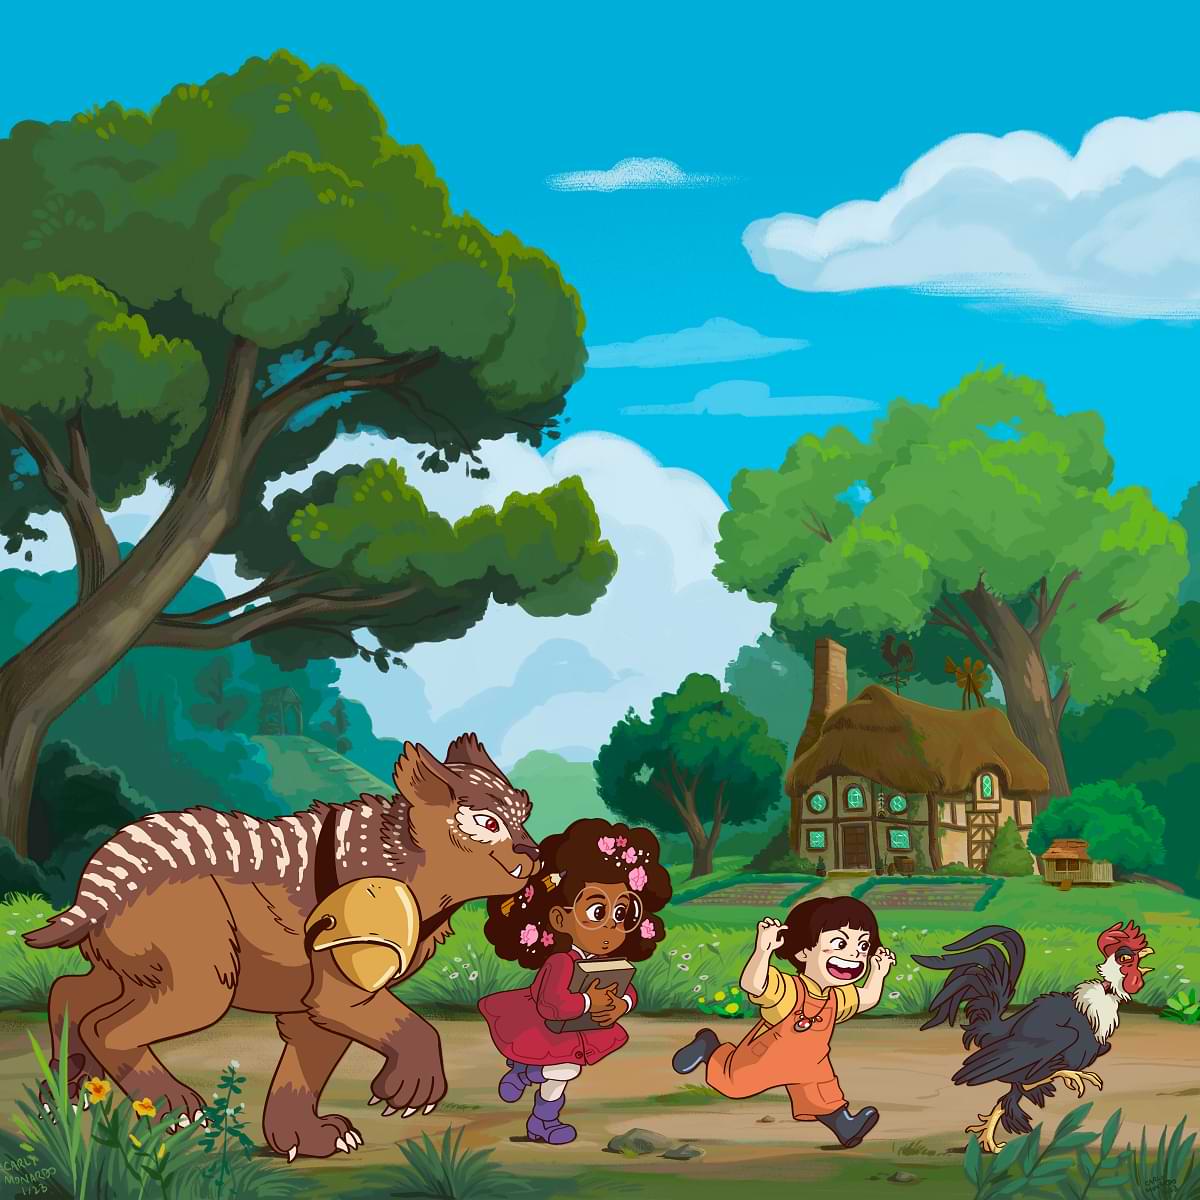 Artwork of young children and a spirit beast chasing a rooster near a cottage.